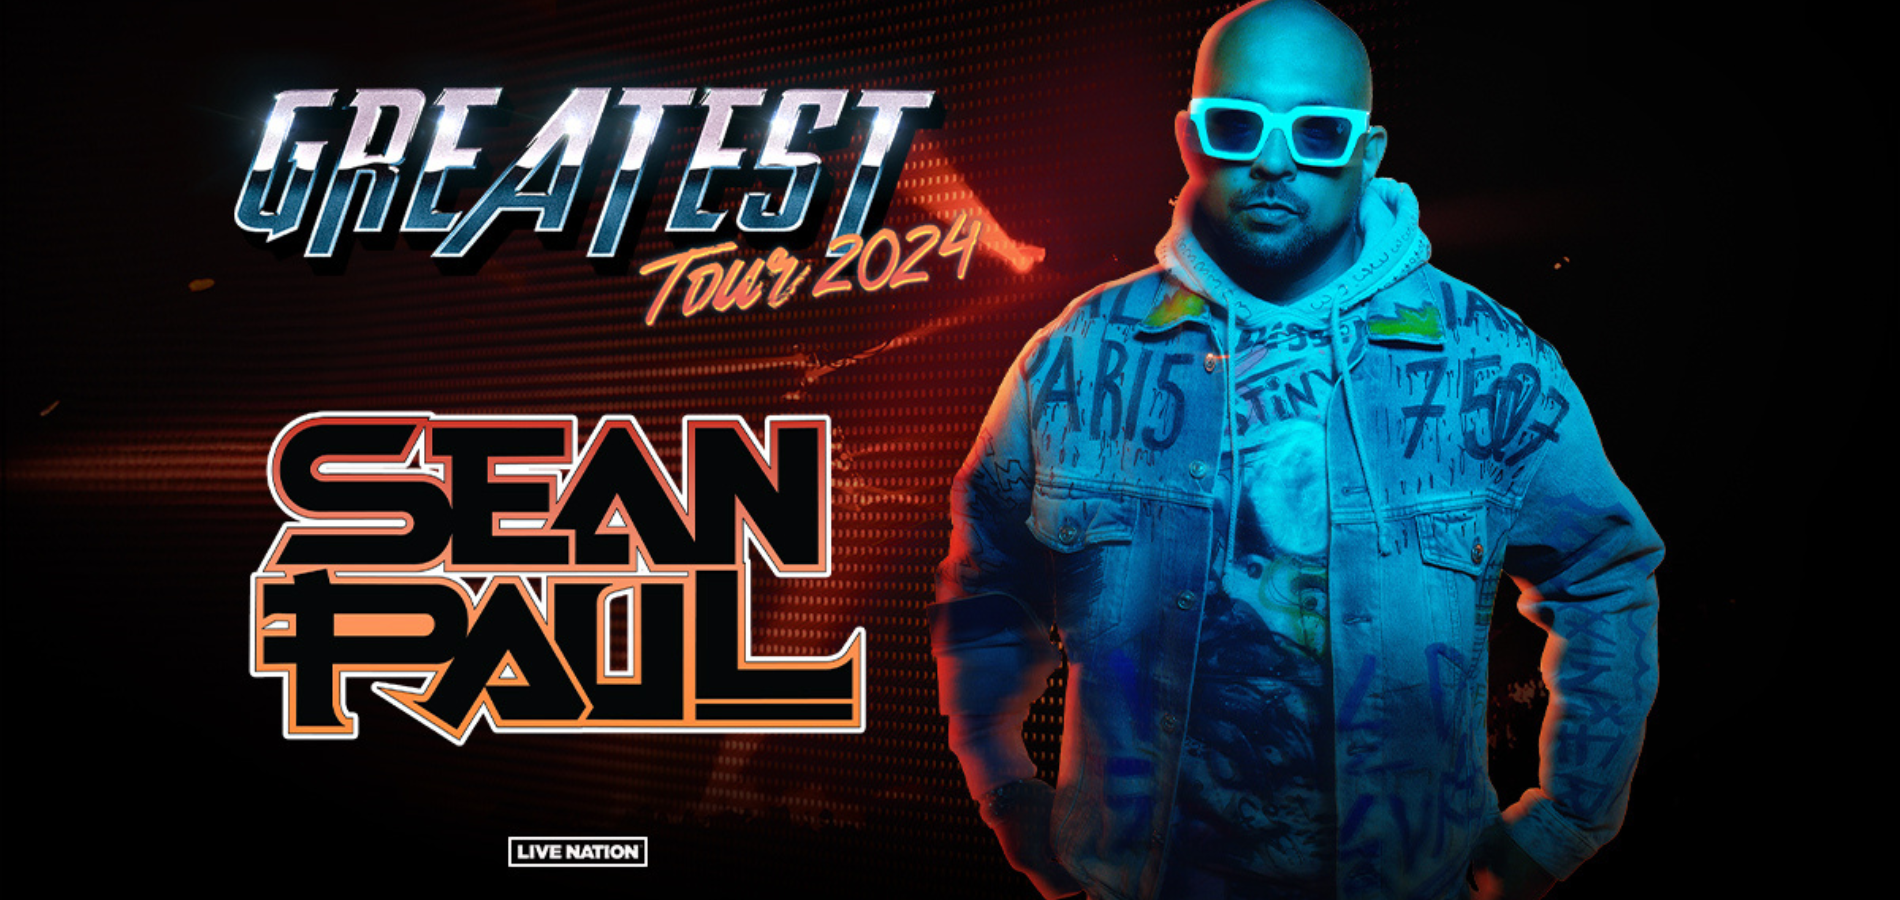 Sean Paul – Greatest Tour 2024 (Moved to The Pavilion at Toyota Music Factory)